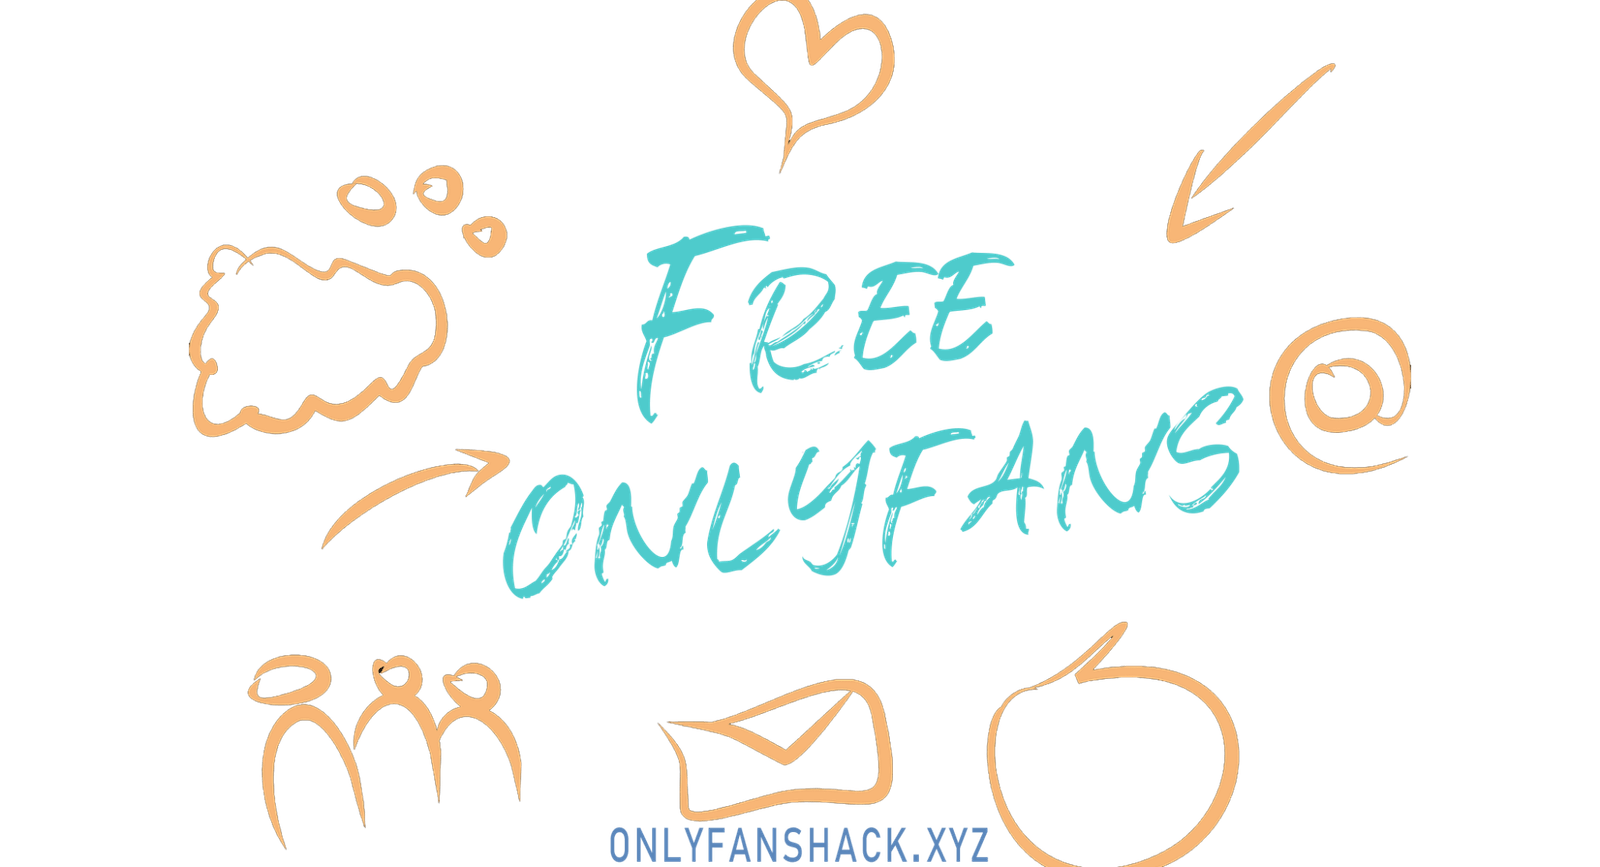 Only fans for free